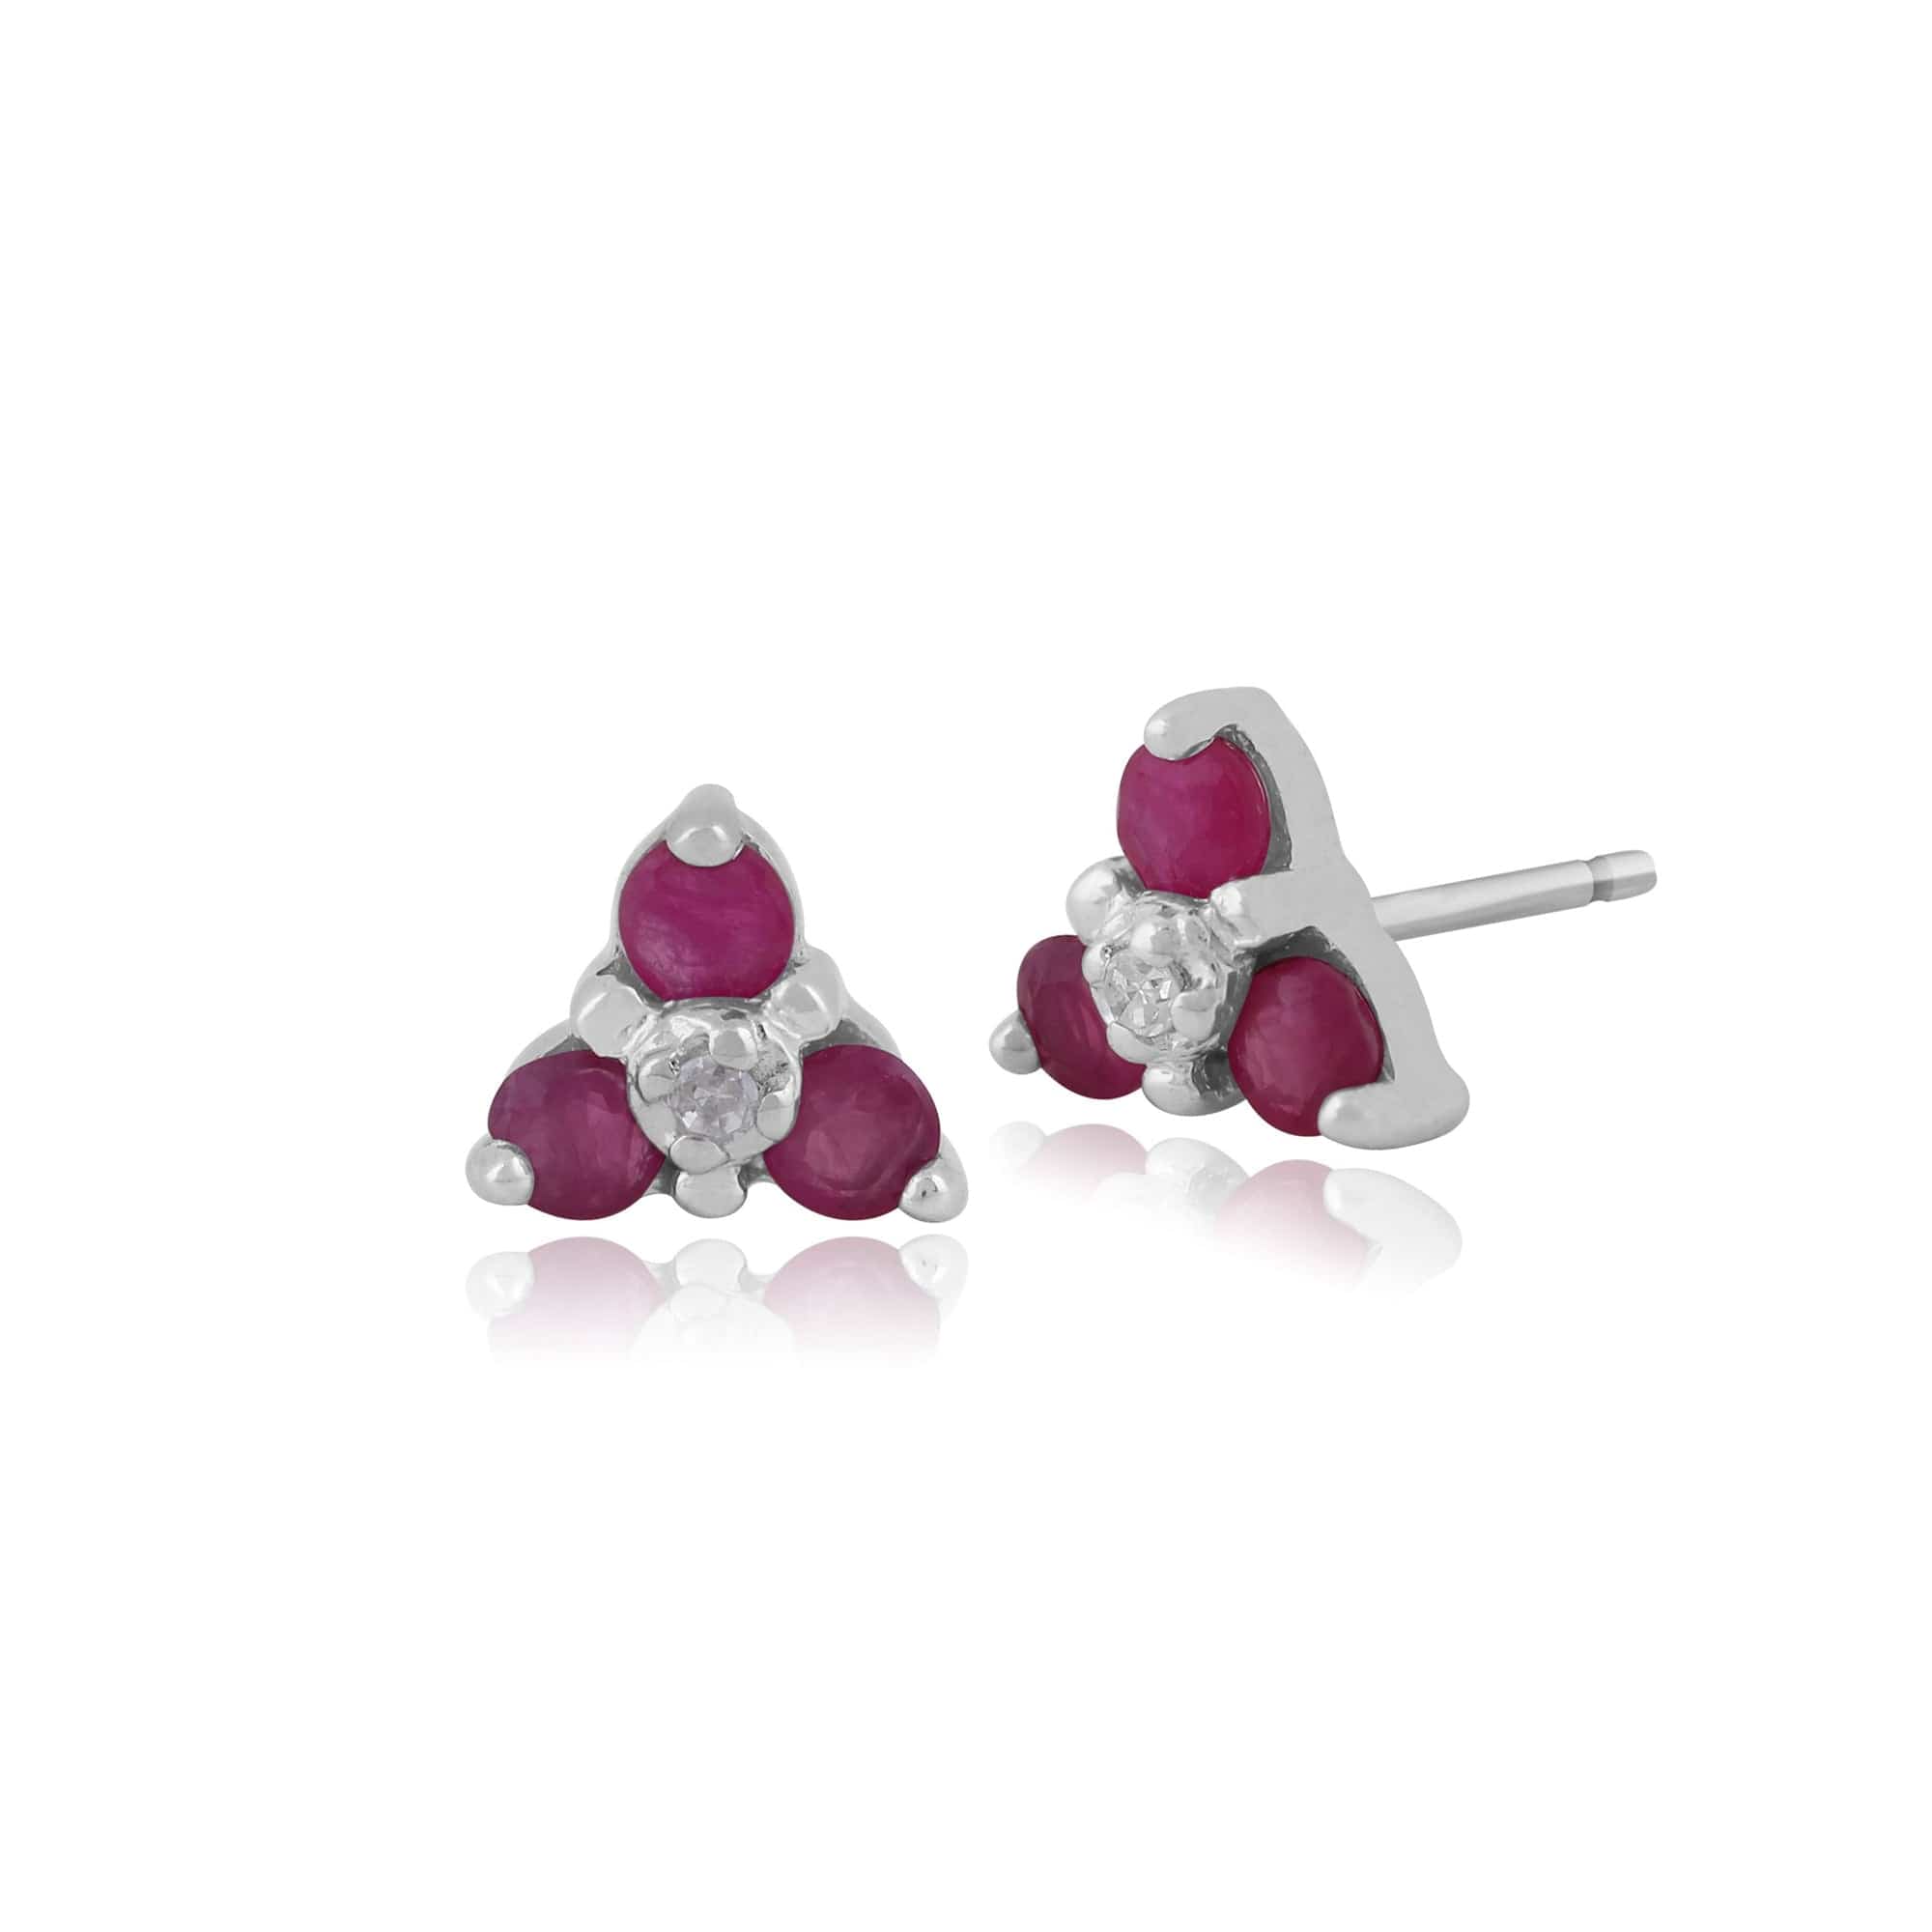 10283 Classic Round Ruby & Diamond Cluster Stud Earrings in 9ct White Gold 1